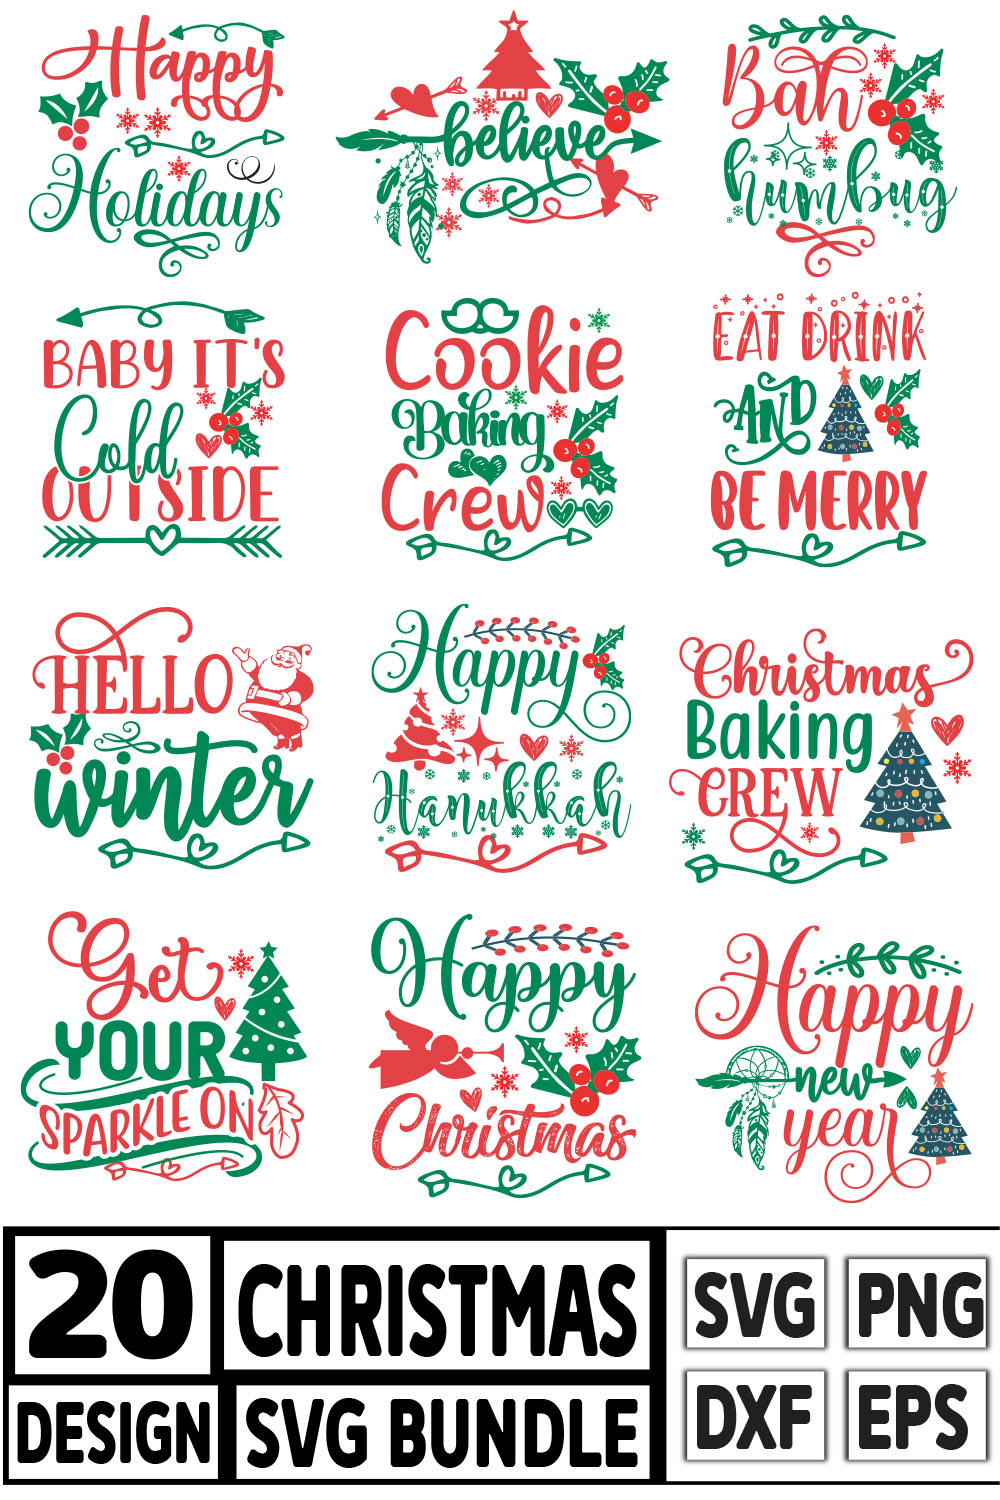 A set of irresistible images for prints on the theme of Christmas.